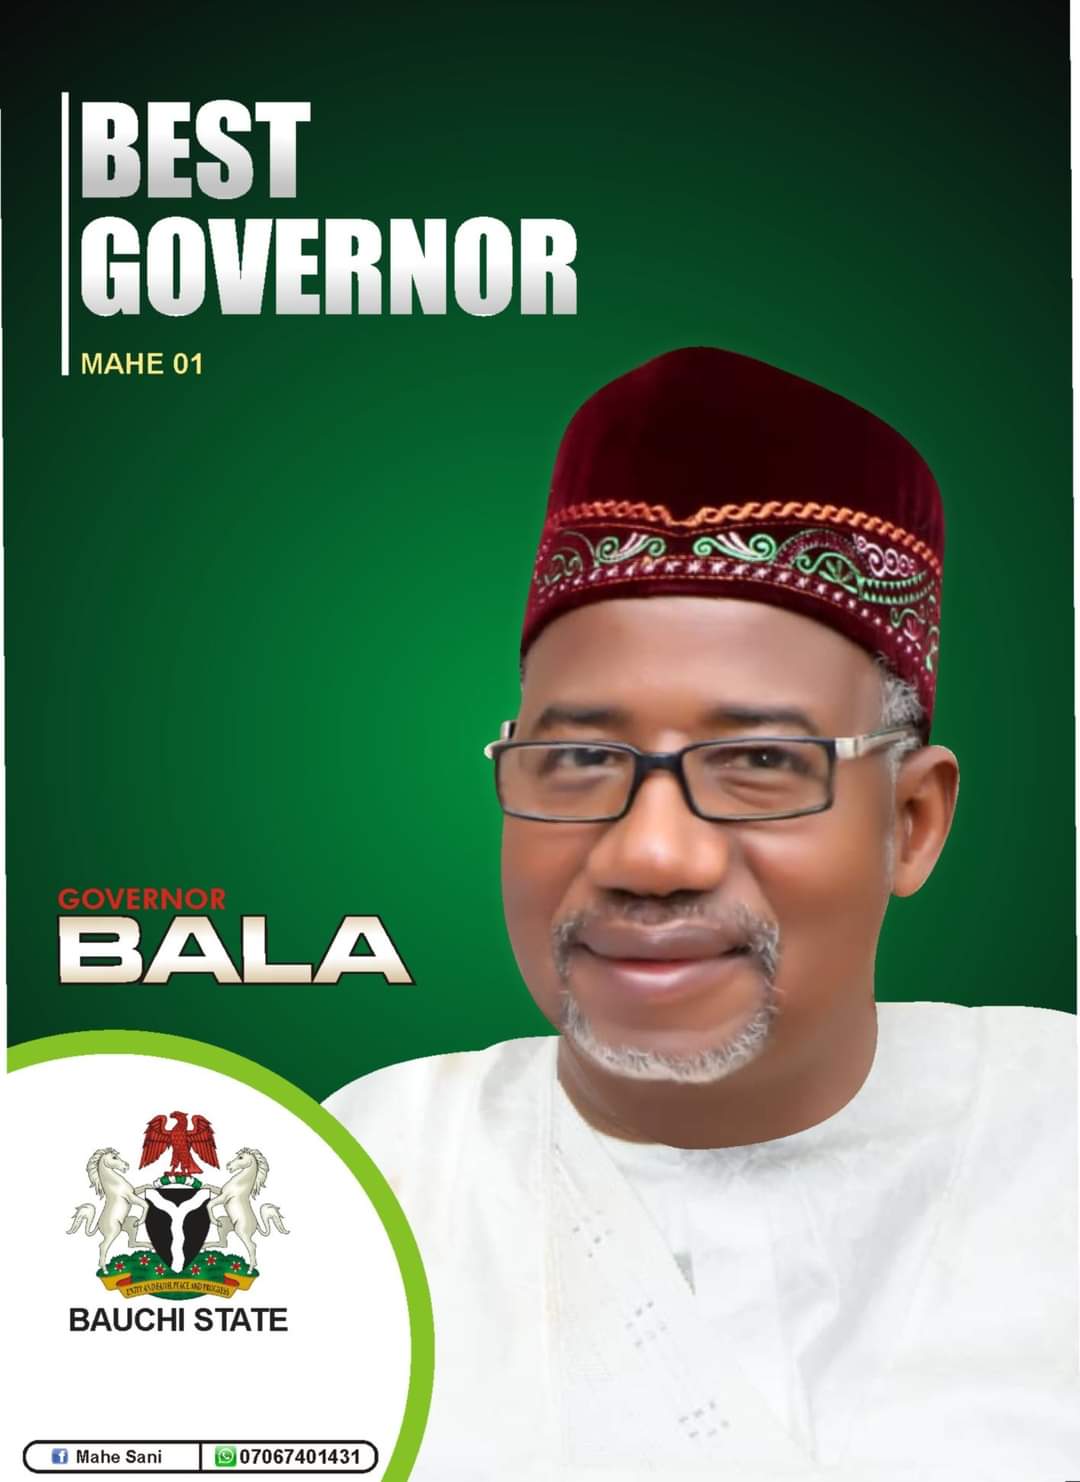 Bauchi Governor Emerges 2020 Business Days Governor of the Year of Fastest Growing State Economy